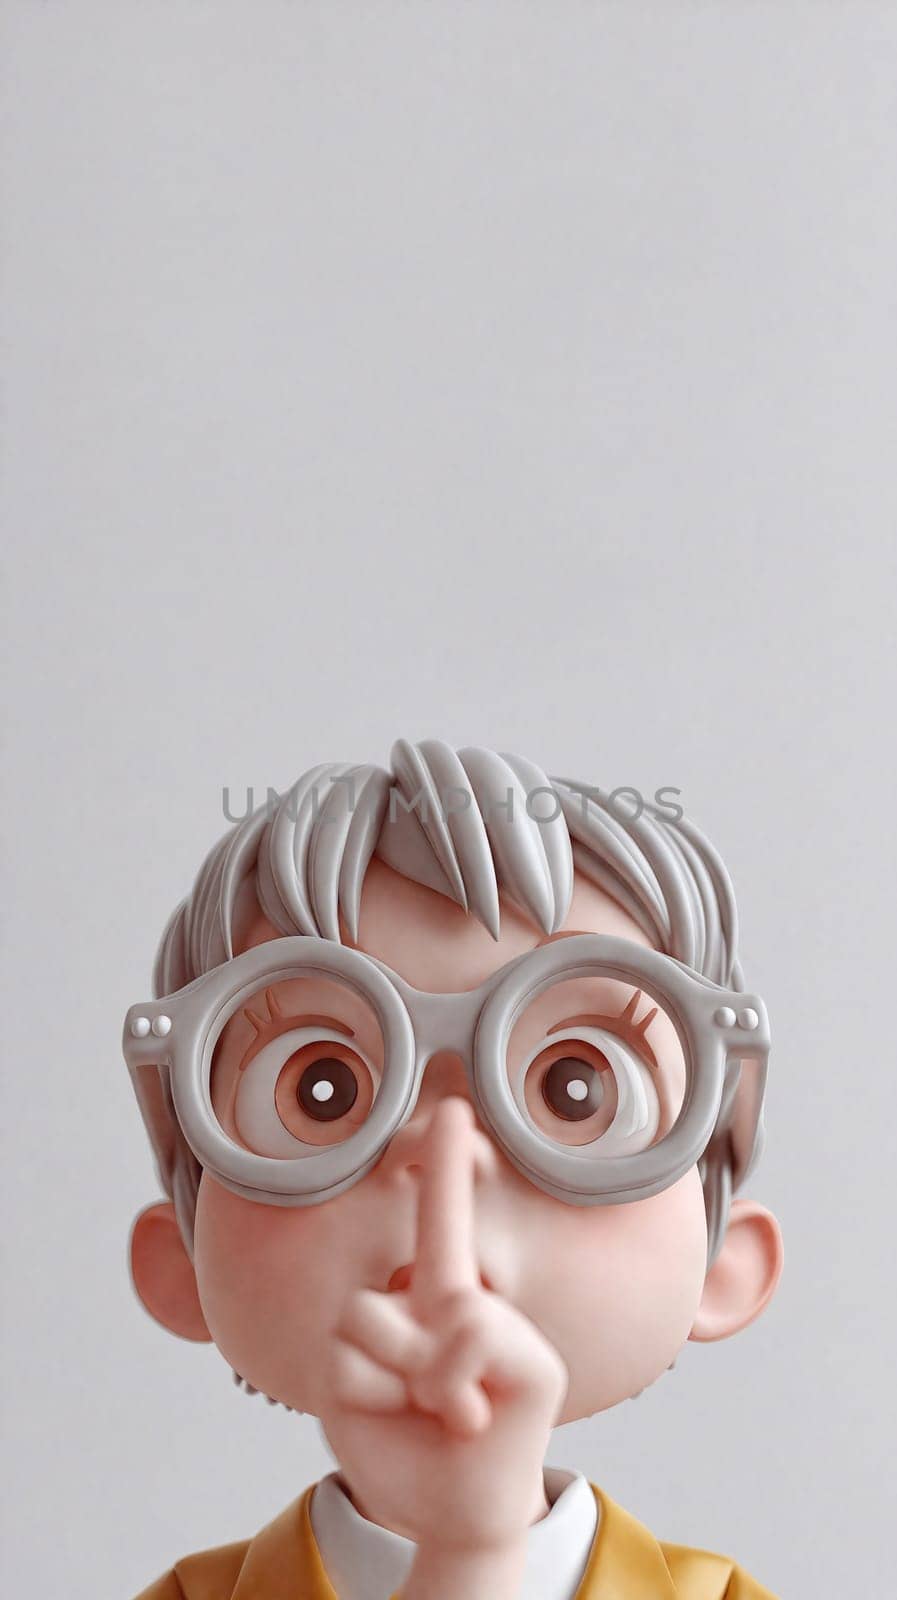 Close-Up of a Toy Figure With Finger On Lips Against A Plain Background by chrisroll